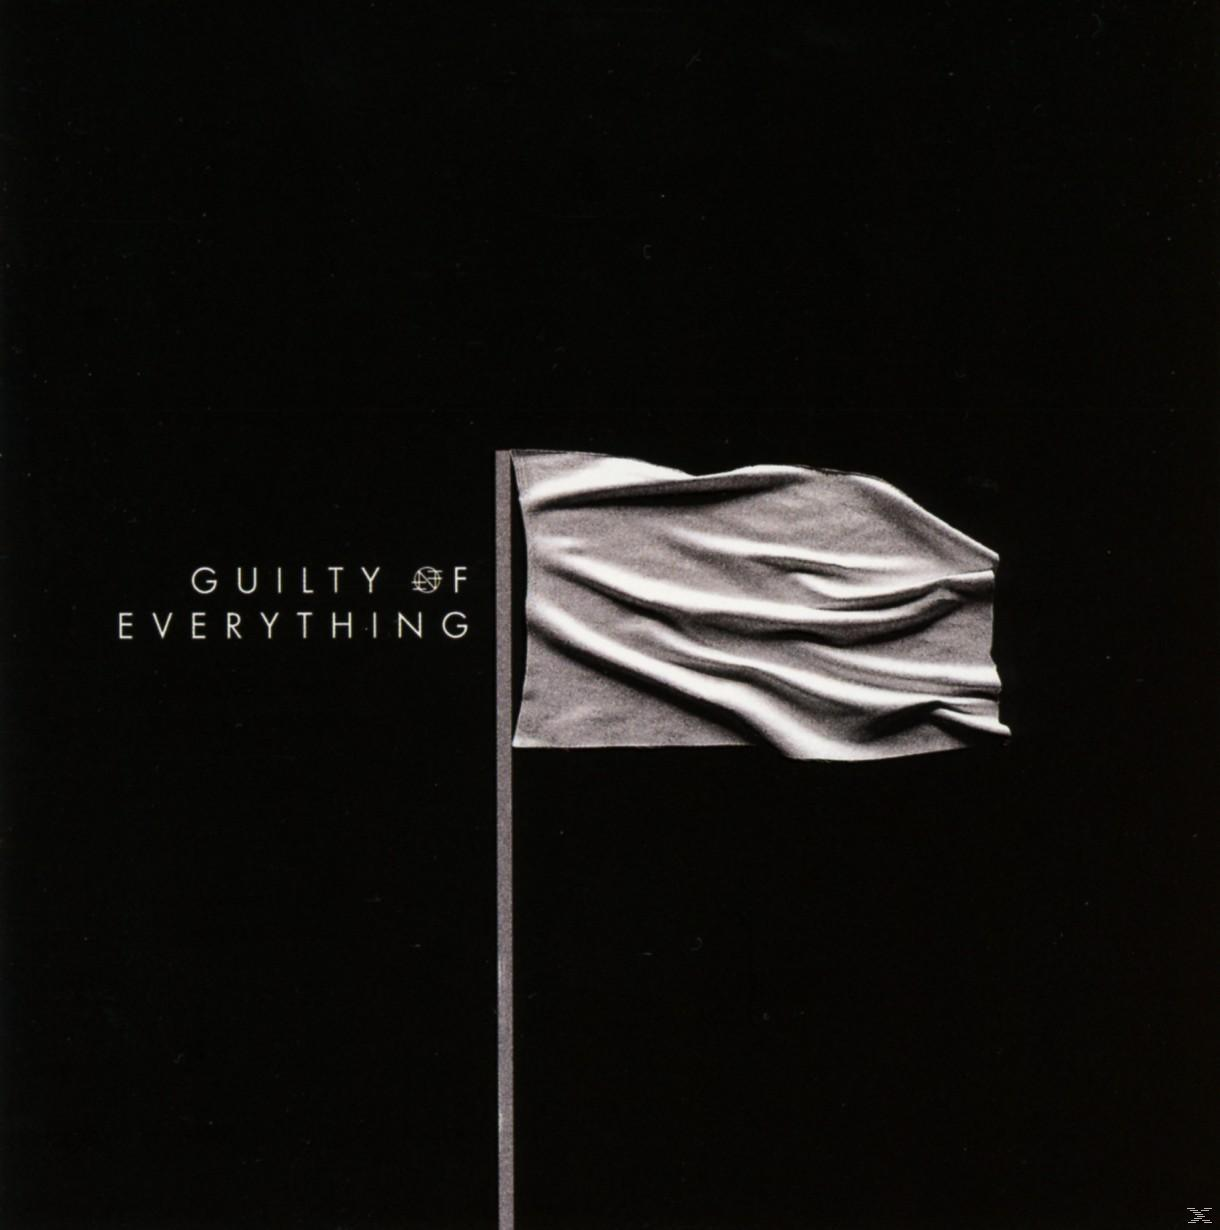 Of (CD) Guilty The Nothing - - Everything